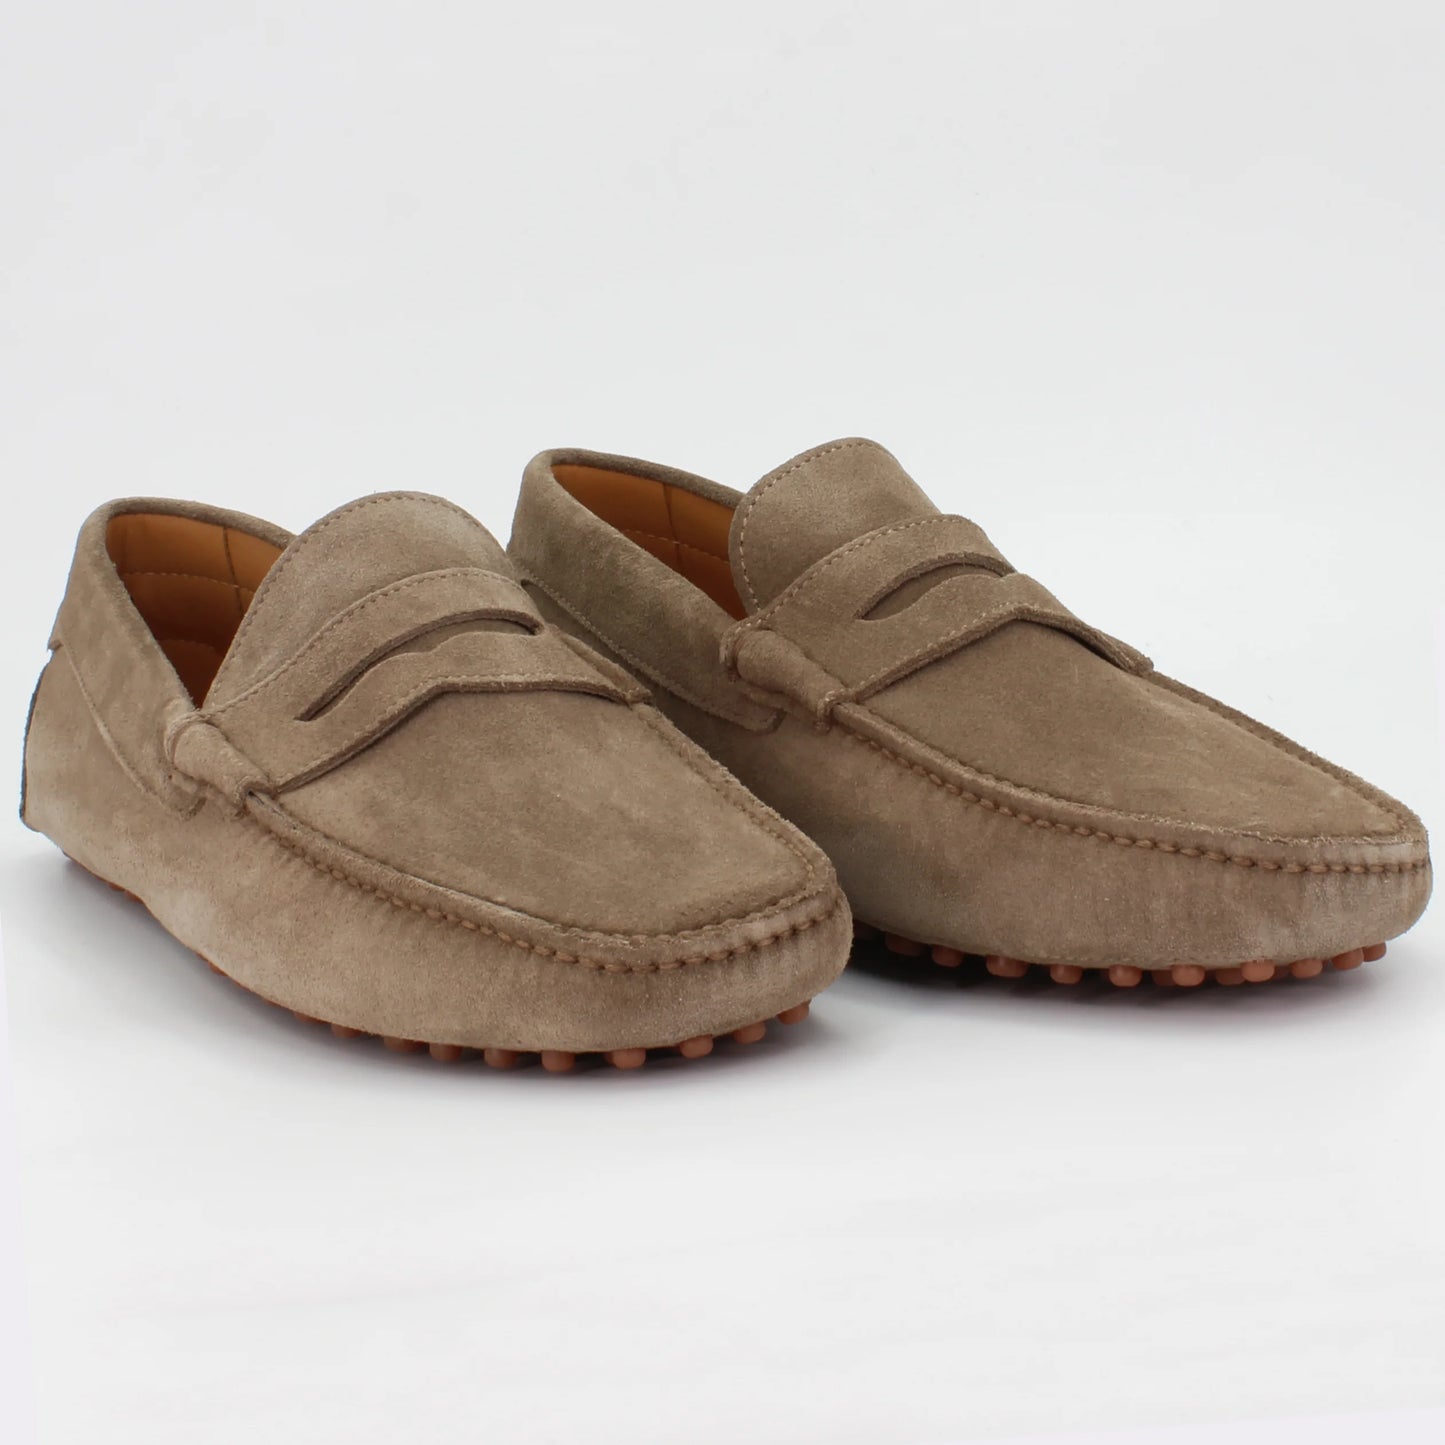 Shop Handmade Italian Leather suede moccasin in almond velour (UO460002) or browse our range of hand-made Italian shoes for men in leather or suede in-store at Aliverti Cape Town, or shop online. We deliver in South Africa & offer multiple payment plans as well as accept multiple safe & secure payment methods.